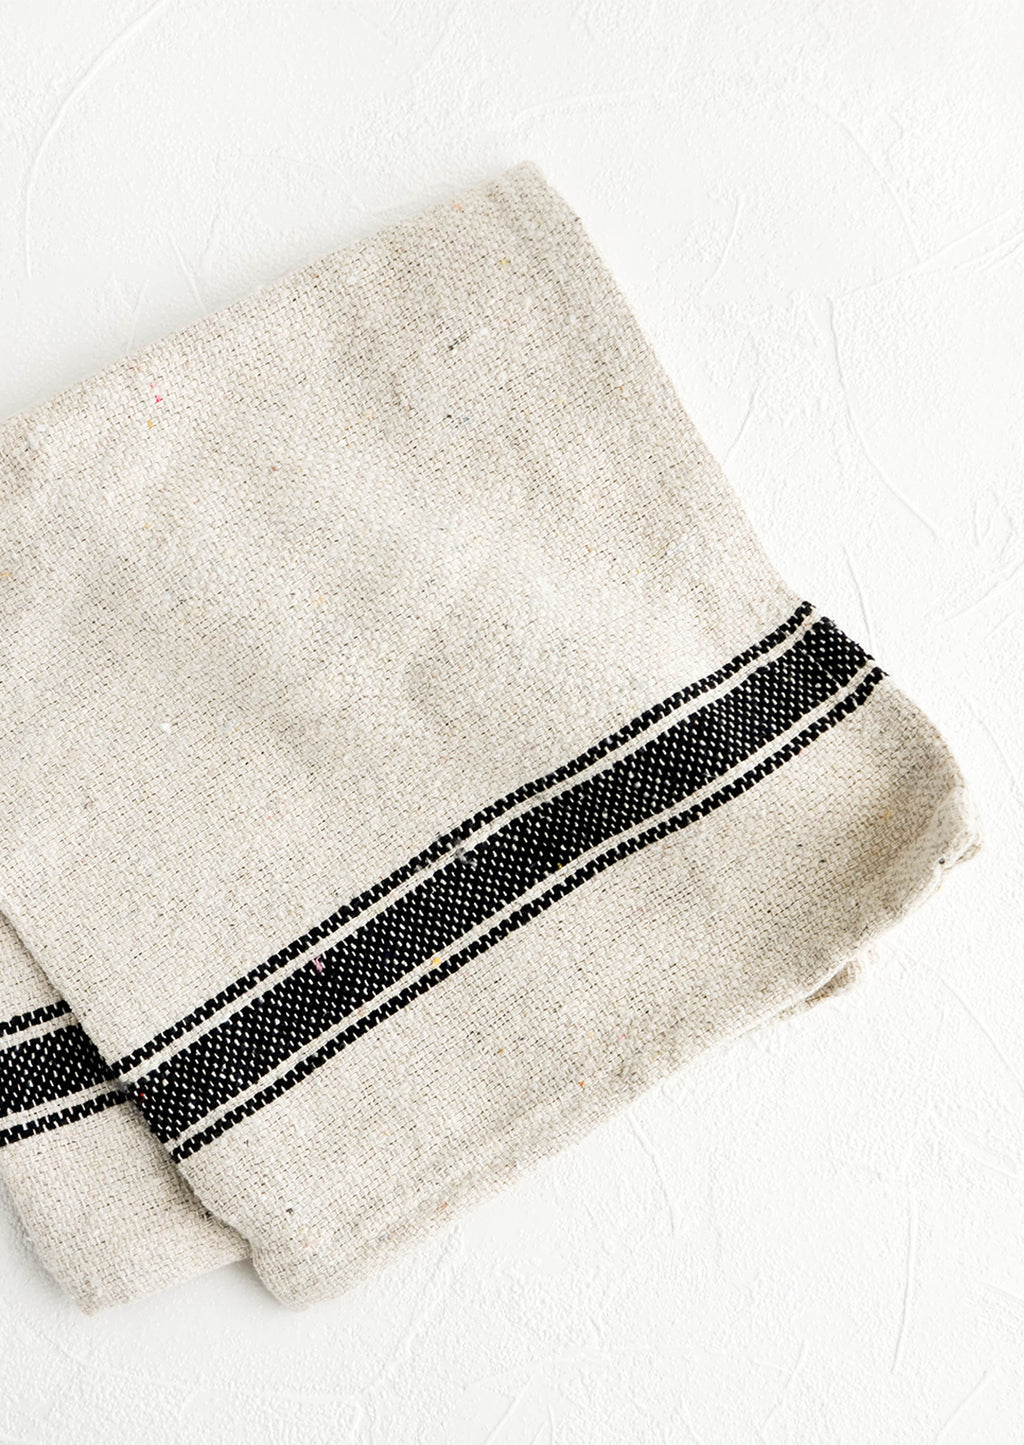 Natural / Black: Thick woven cotton kitchen towel in natural with thick black stripe